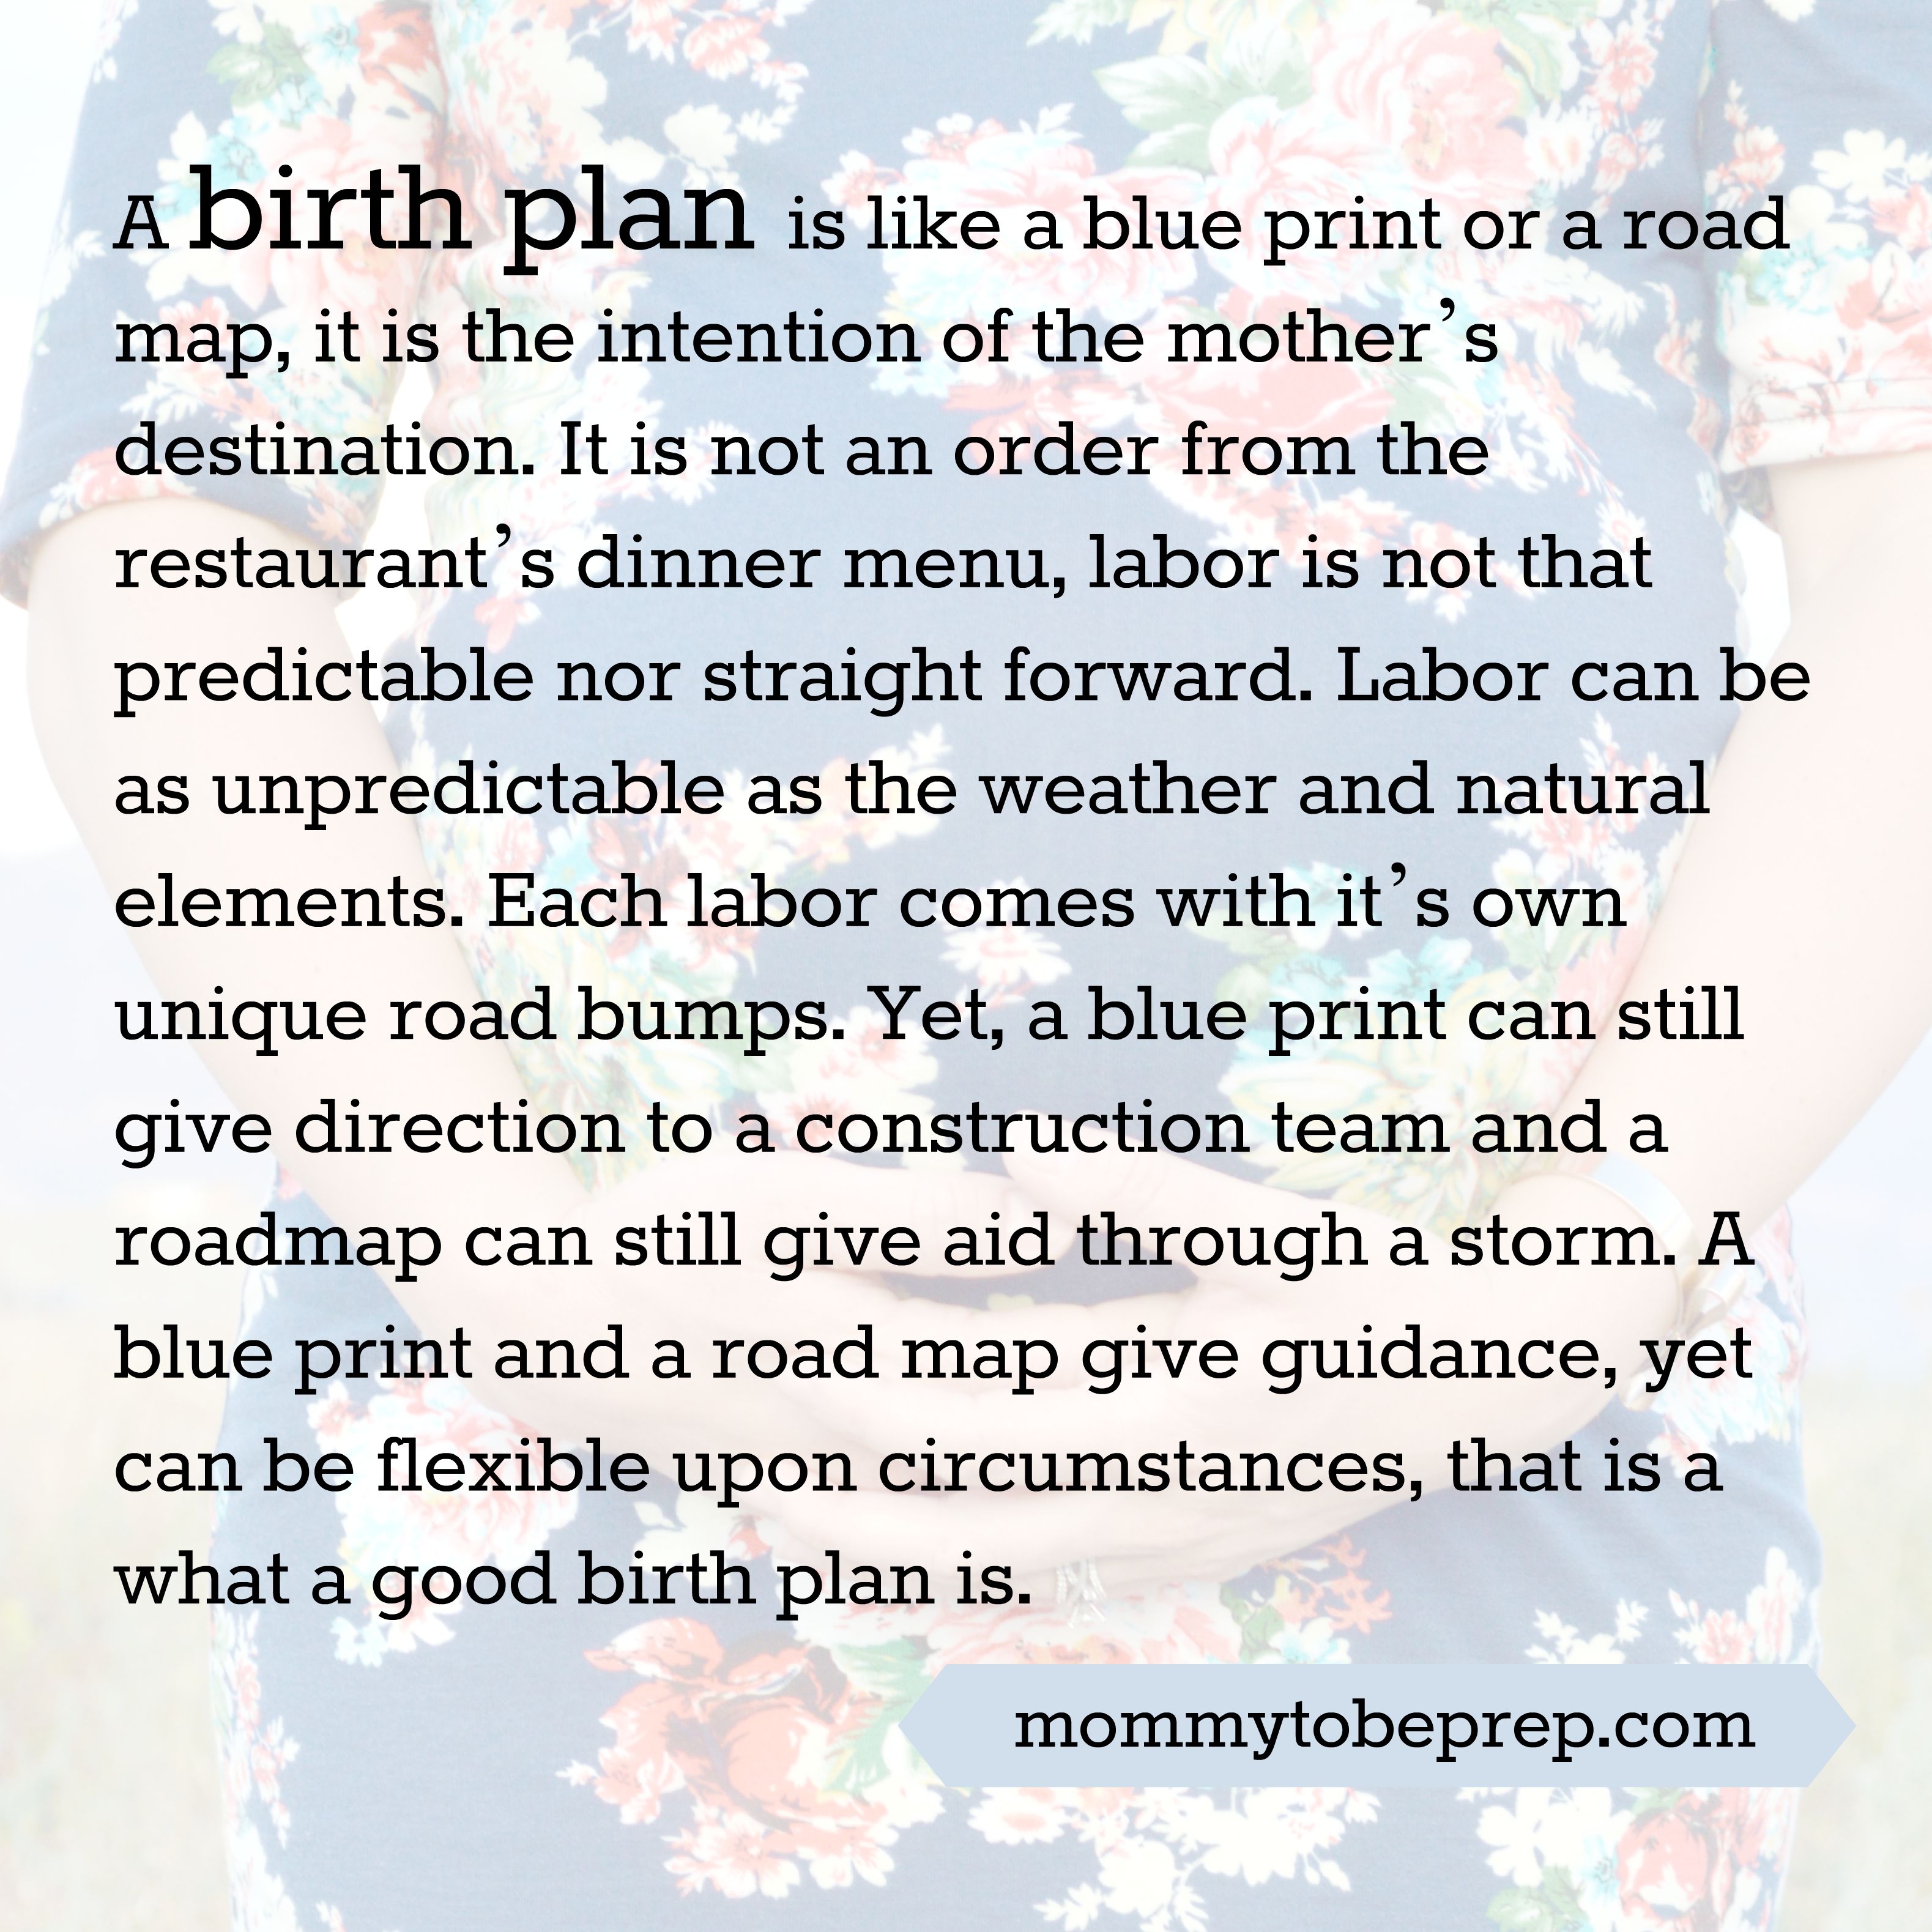 What is a good birth plan